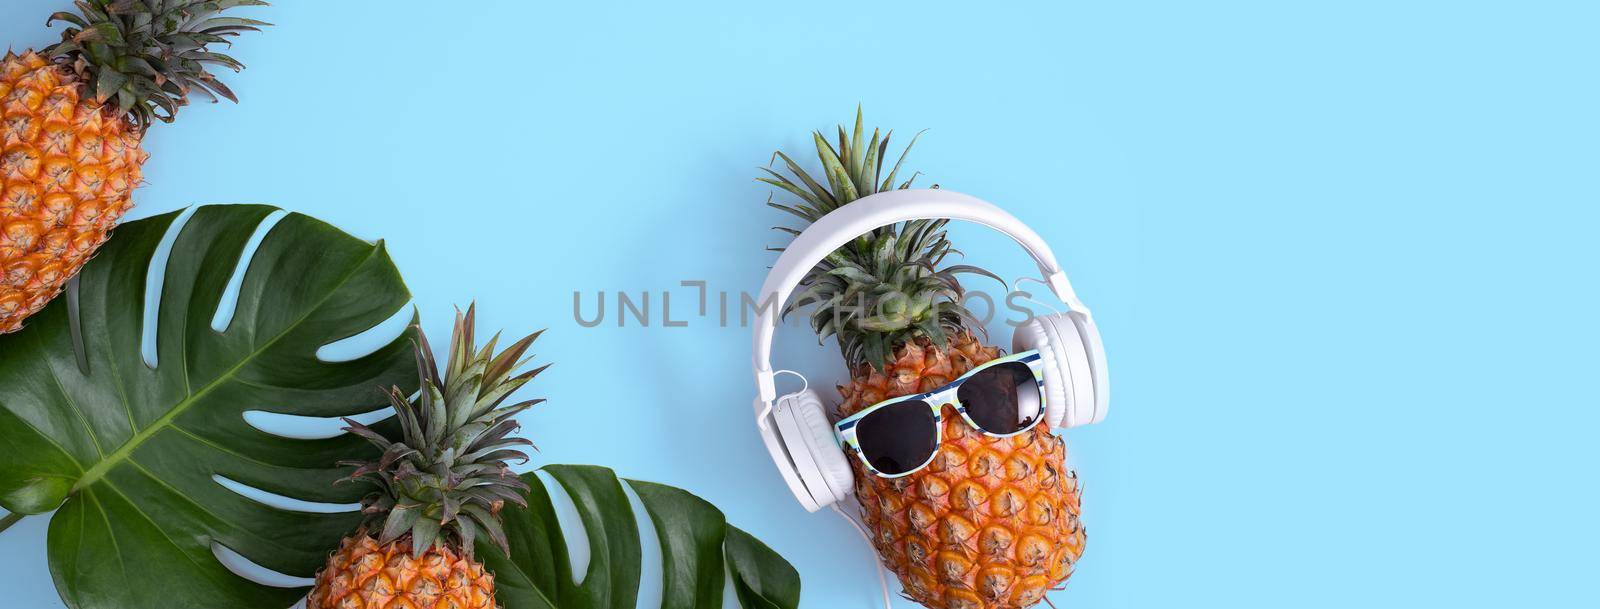 Funny pineapple wearing white headphone, concept of listening music, isolated on blue background with tropical palm leaves, top view, flat lay design.